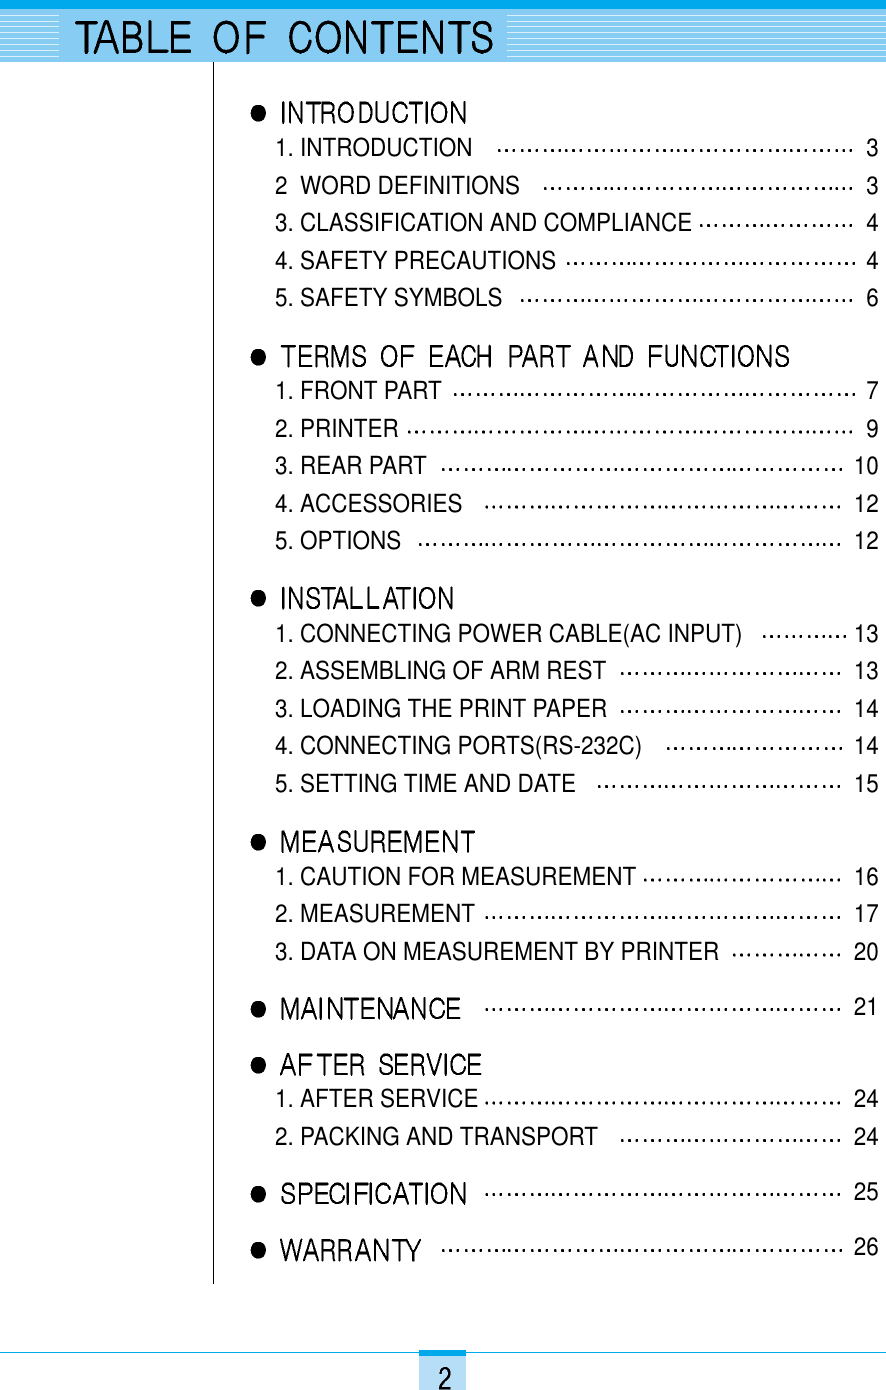 1. INTRODUCTION 32  WORD DEFINITIONS 3    3. CLASSIFICATION AND COMPLIANCE 44. SAFETY PRECAUTIONS 45. SAFETY SYMBOLS 61. FRONT PART 72. PRINTER 93. REAR PART 104. ACCESSORIES 125. OPTIONS 121. CONNECTING POWER CABLE(AC INPUT) 132. ASSEMBLING OF ARM REST 133. LOADING THE PRINT PAPER 144. CONNECTING PORTS(RS-232C) 145. SETTING TIME AND DATE 151. CAUTION FOR MEASUREMENT 162. MEASUREMENT 173. DATA ON MEASUREMENT BY PRINTER 20211. AFTER SERVICE 242. PACKING AND TRANSPORT 242526